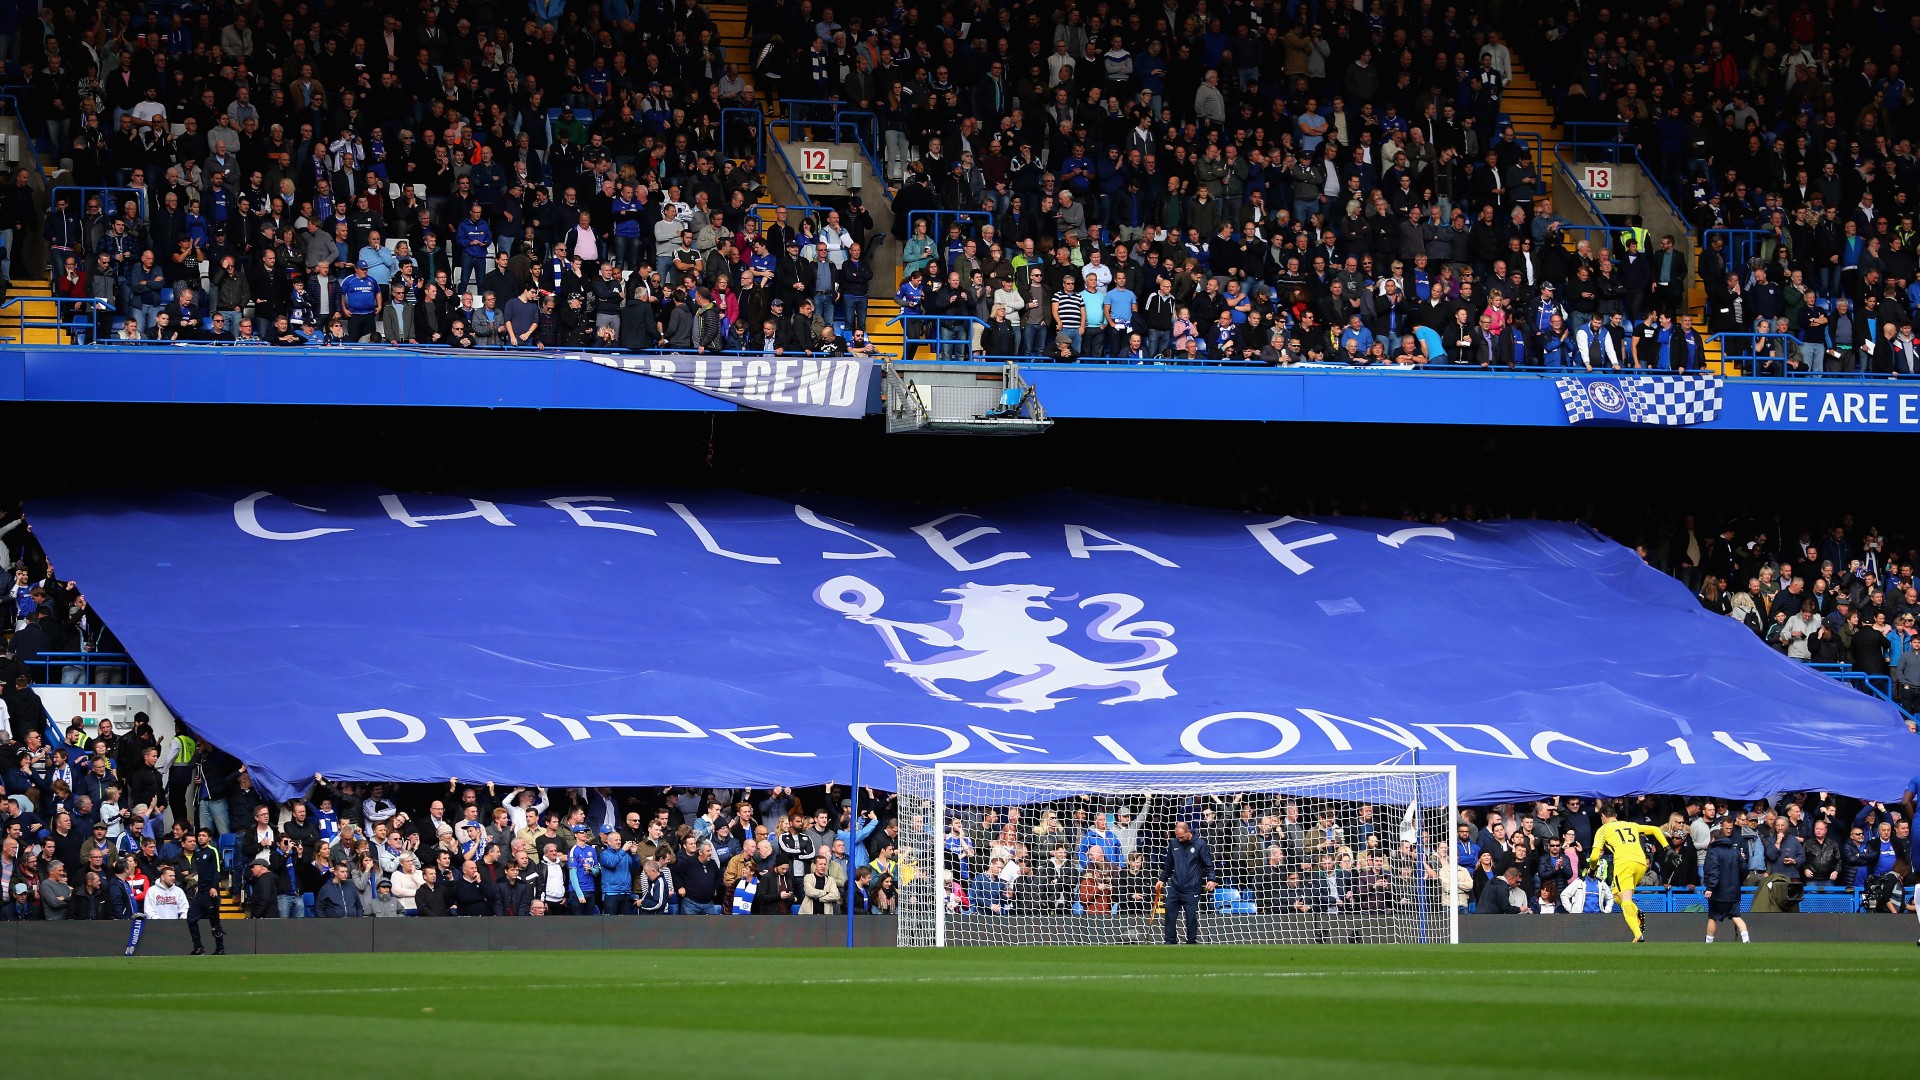 ‘Blue is the colour’ – Lyrics & story behind famous Chelsea chant